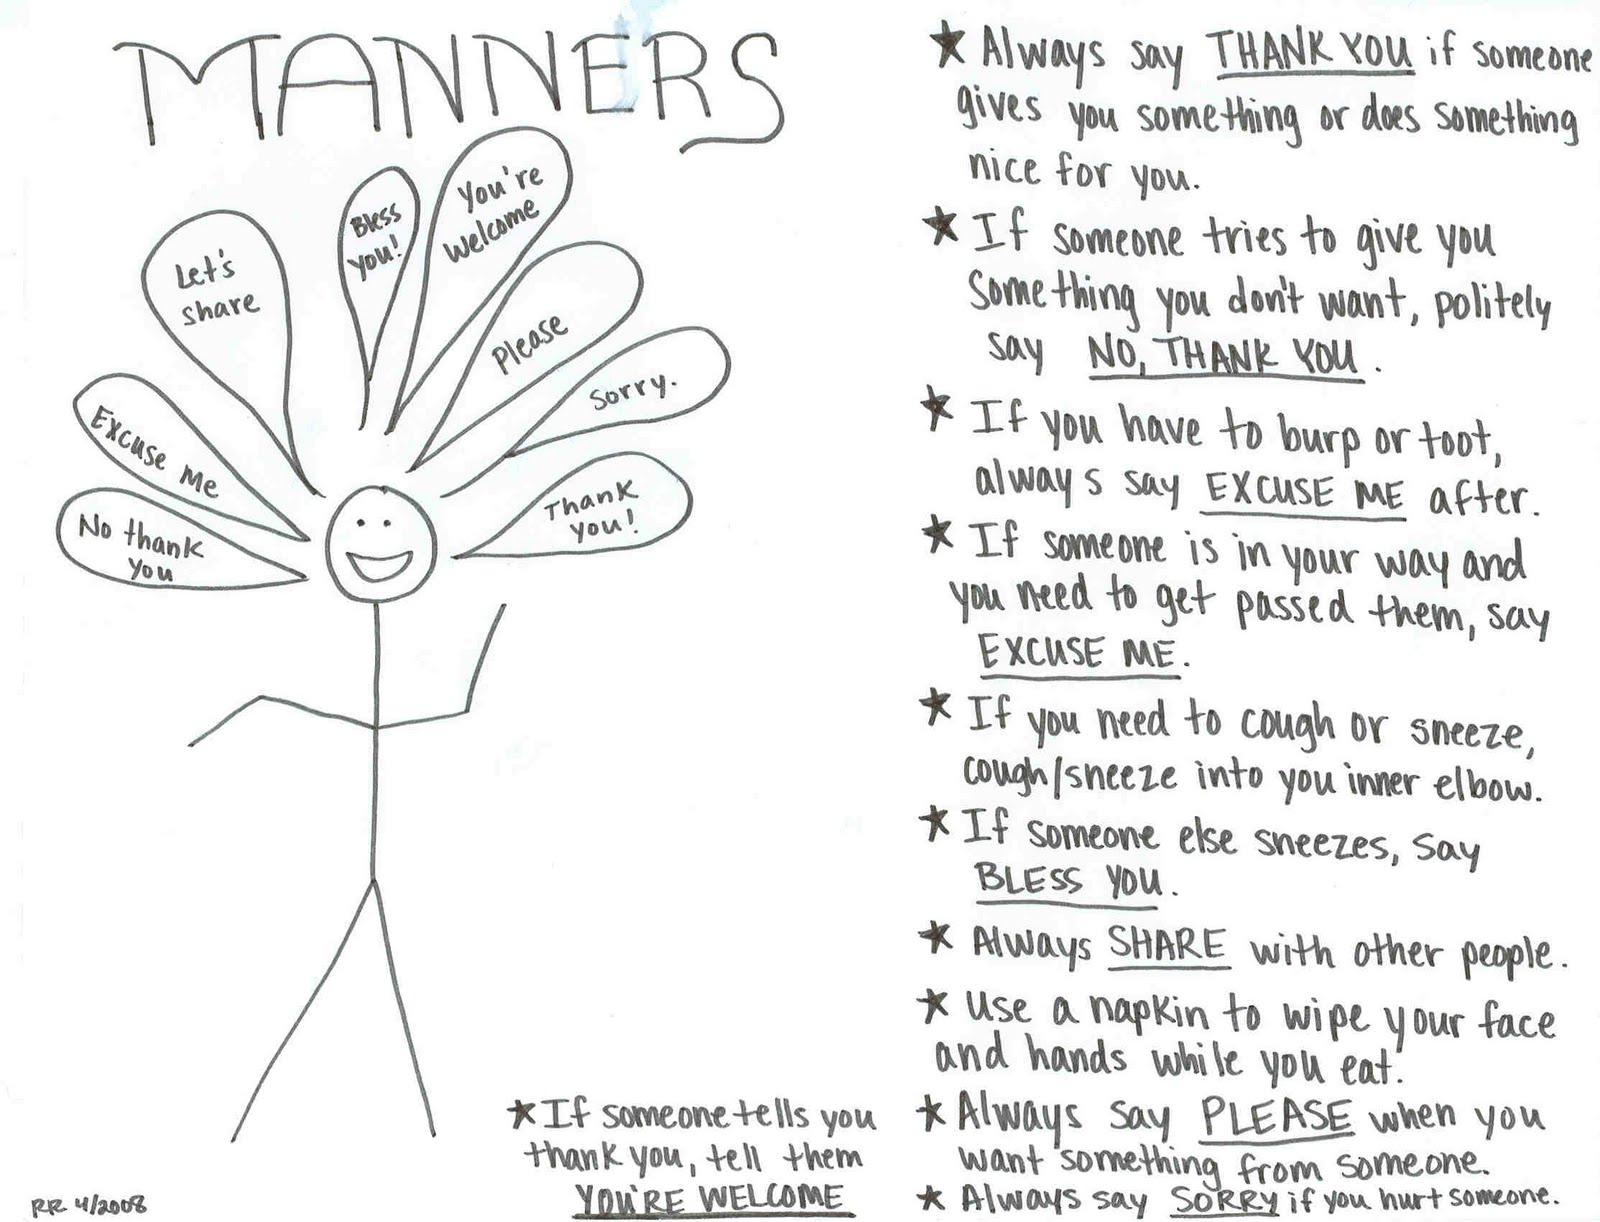 Ashley's Blog: Manners